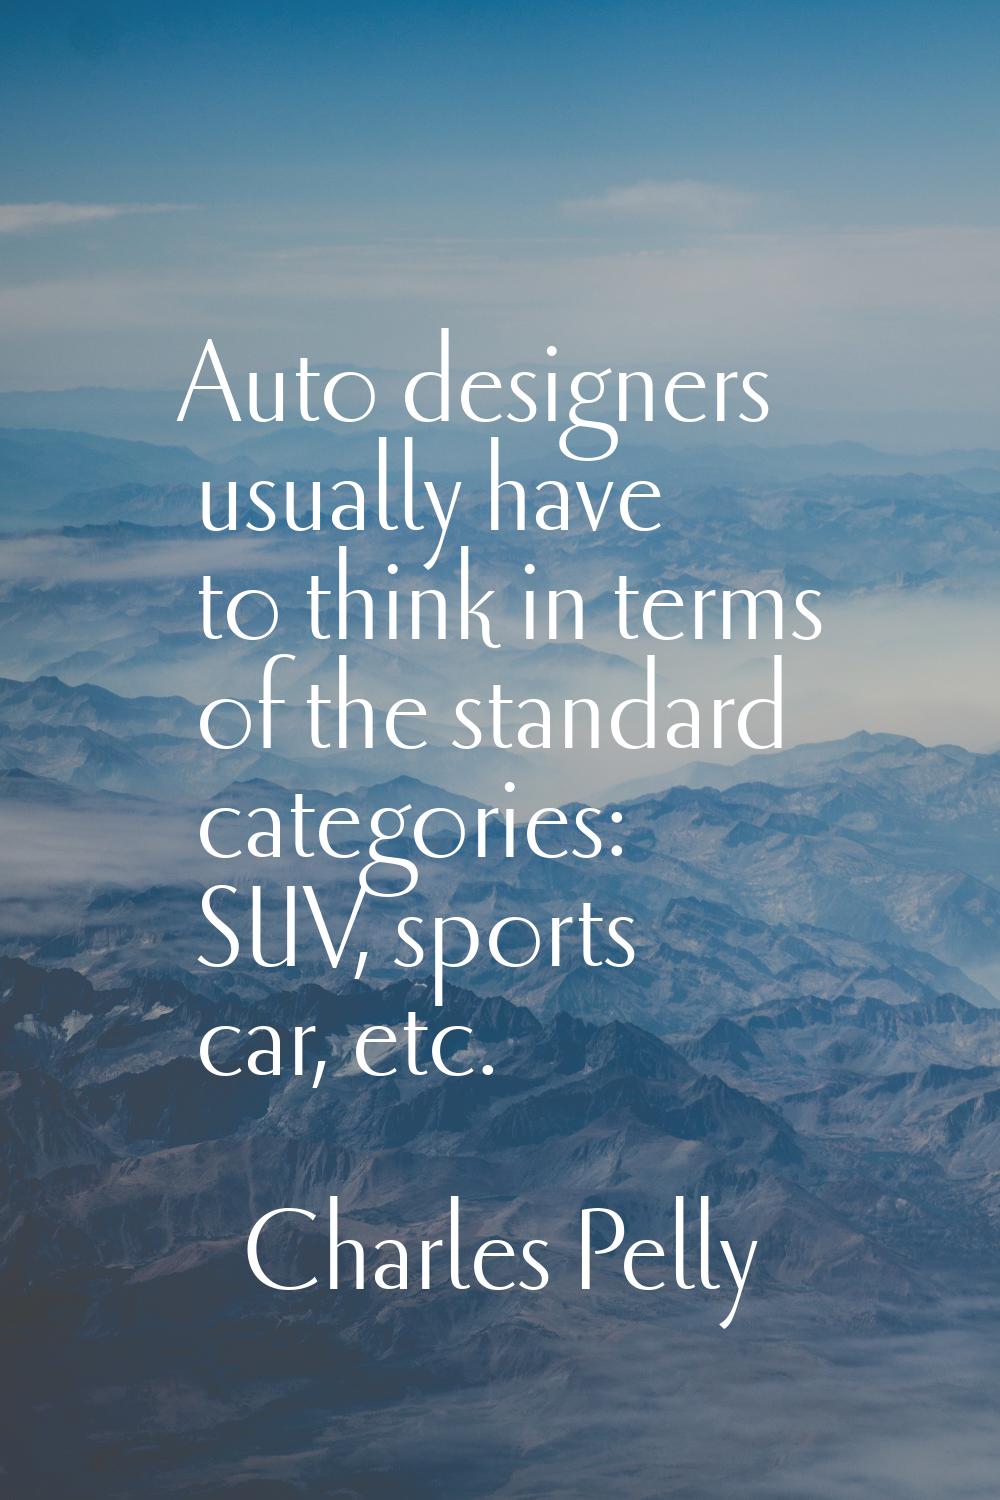 Auto designers usually have to think in terms of the standard categories: SUV, sports car, etc.